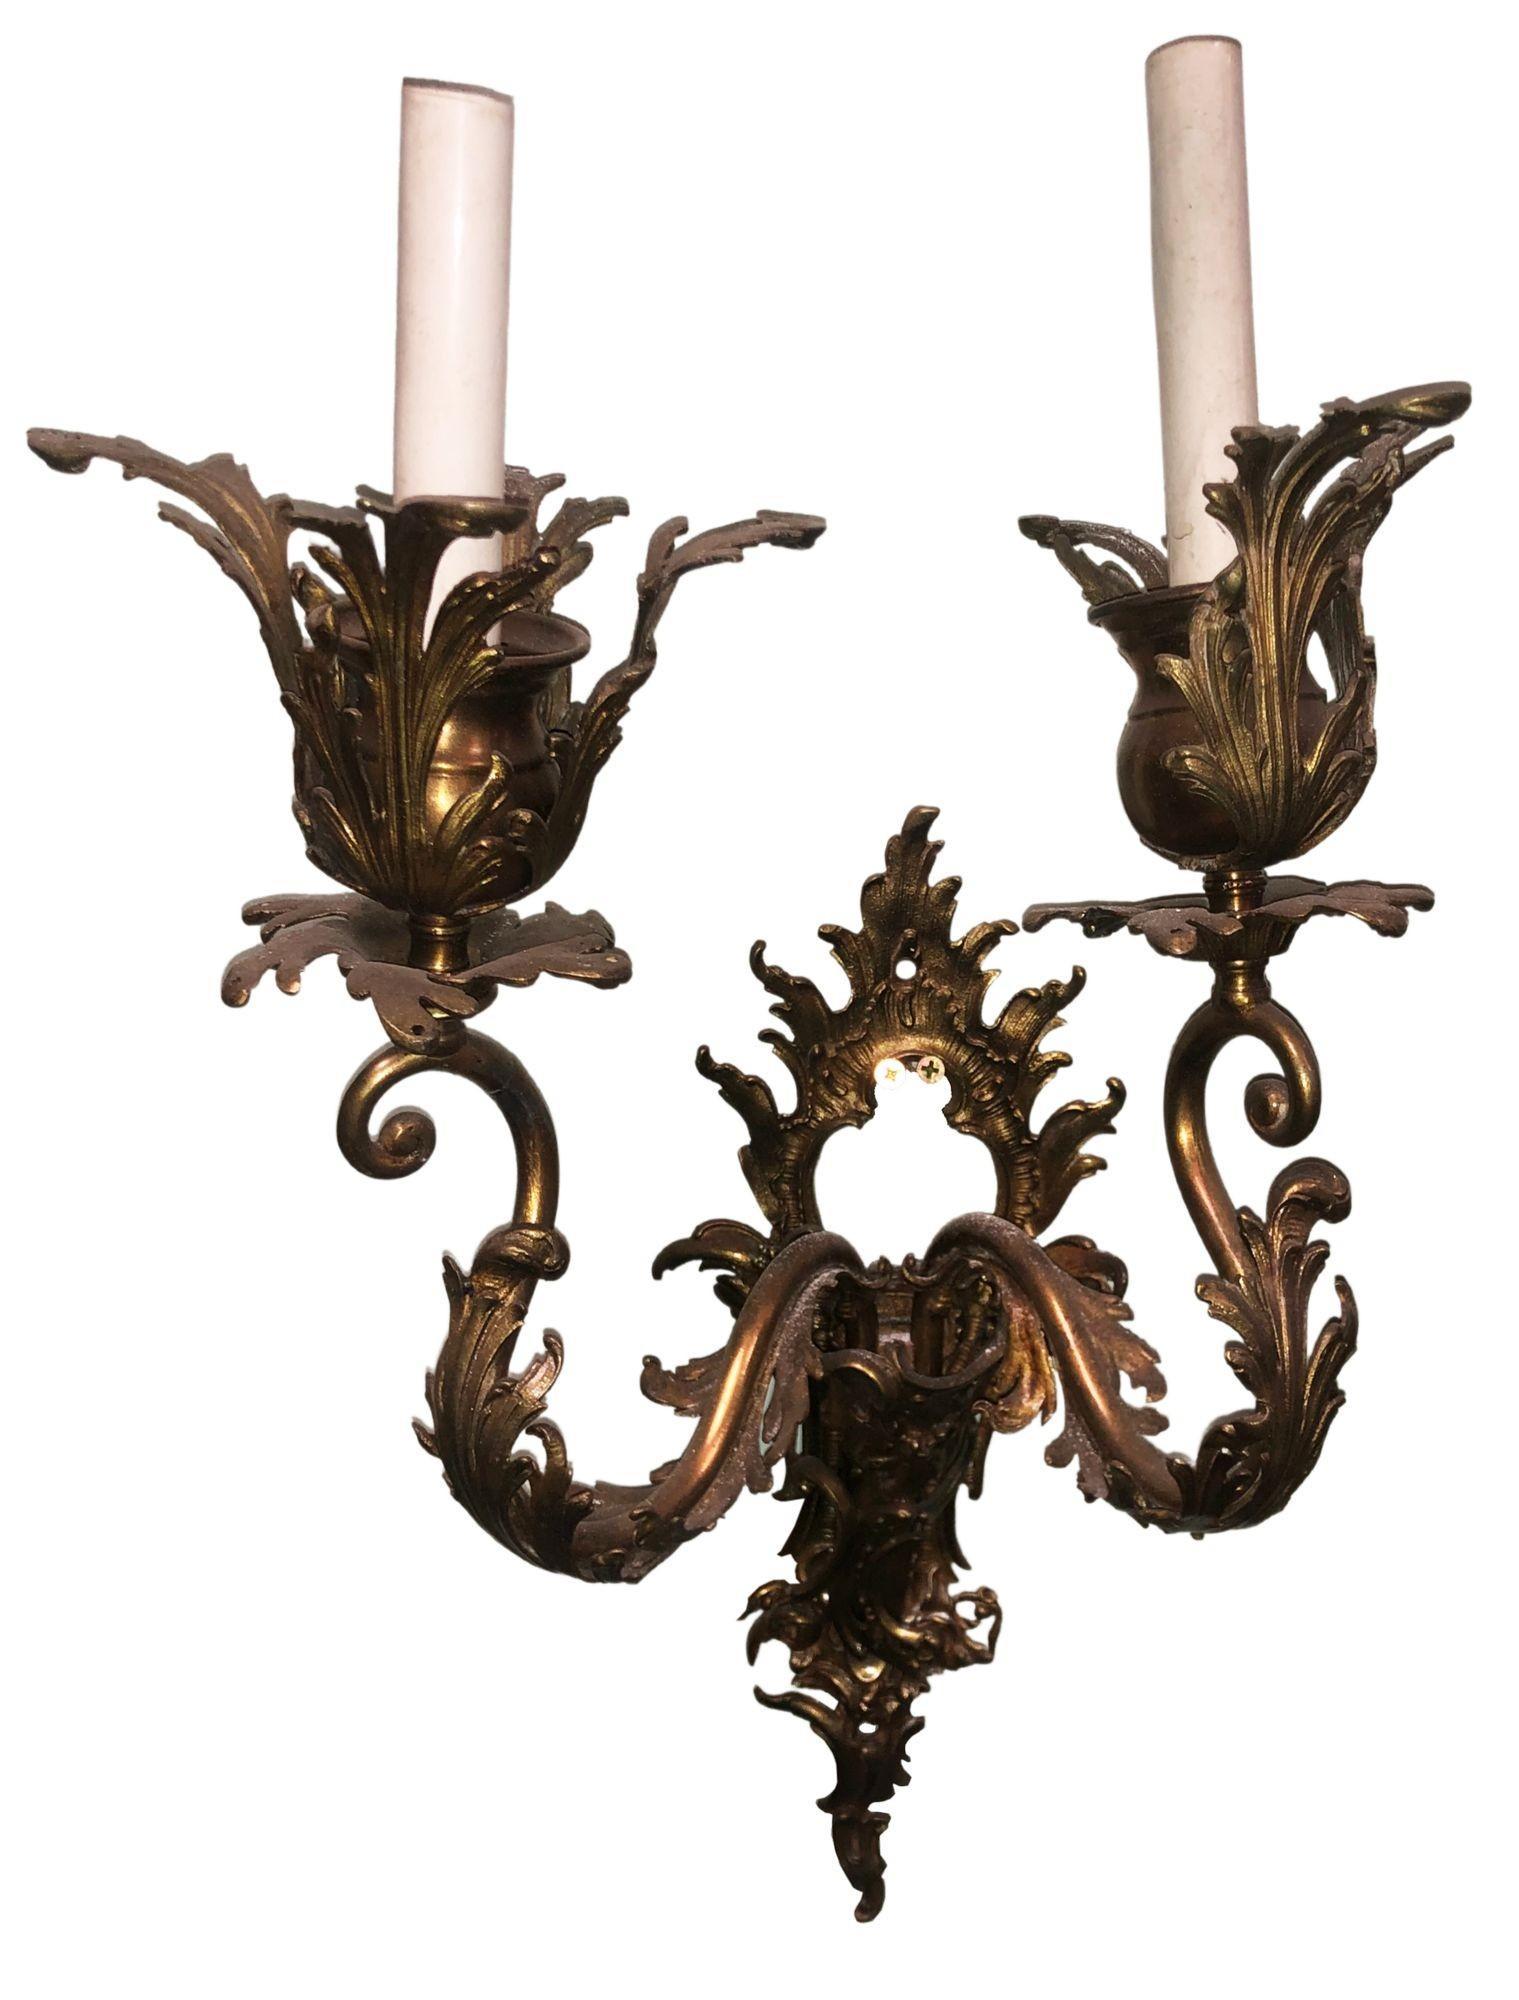 Discover opulence with this exquisite Antique Italian Baroque-style bronze candelabra wall sconce, now available for sale. This ornate piece evokes the grandeur of the Baroque era, with intricate detailing and multiple candleholders. Its timeless